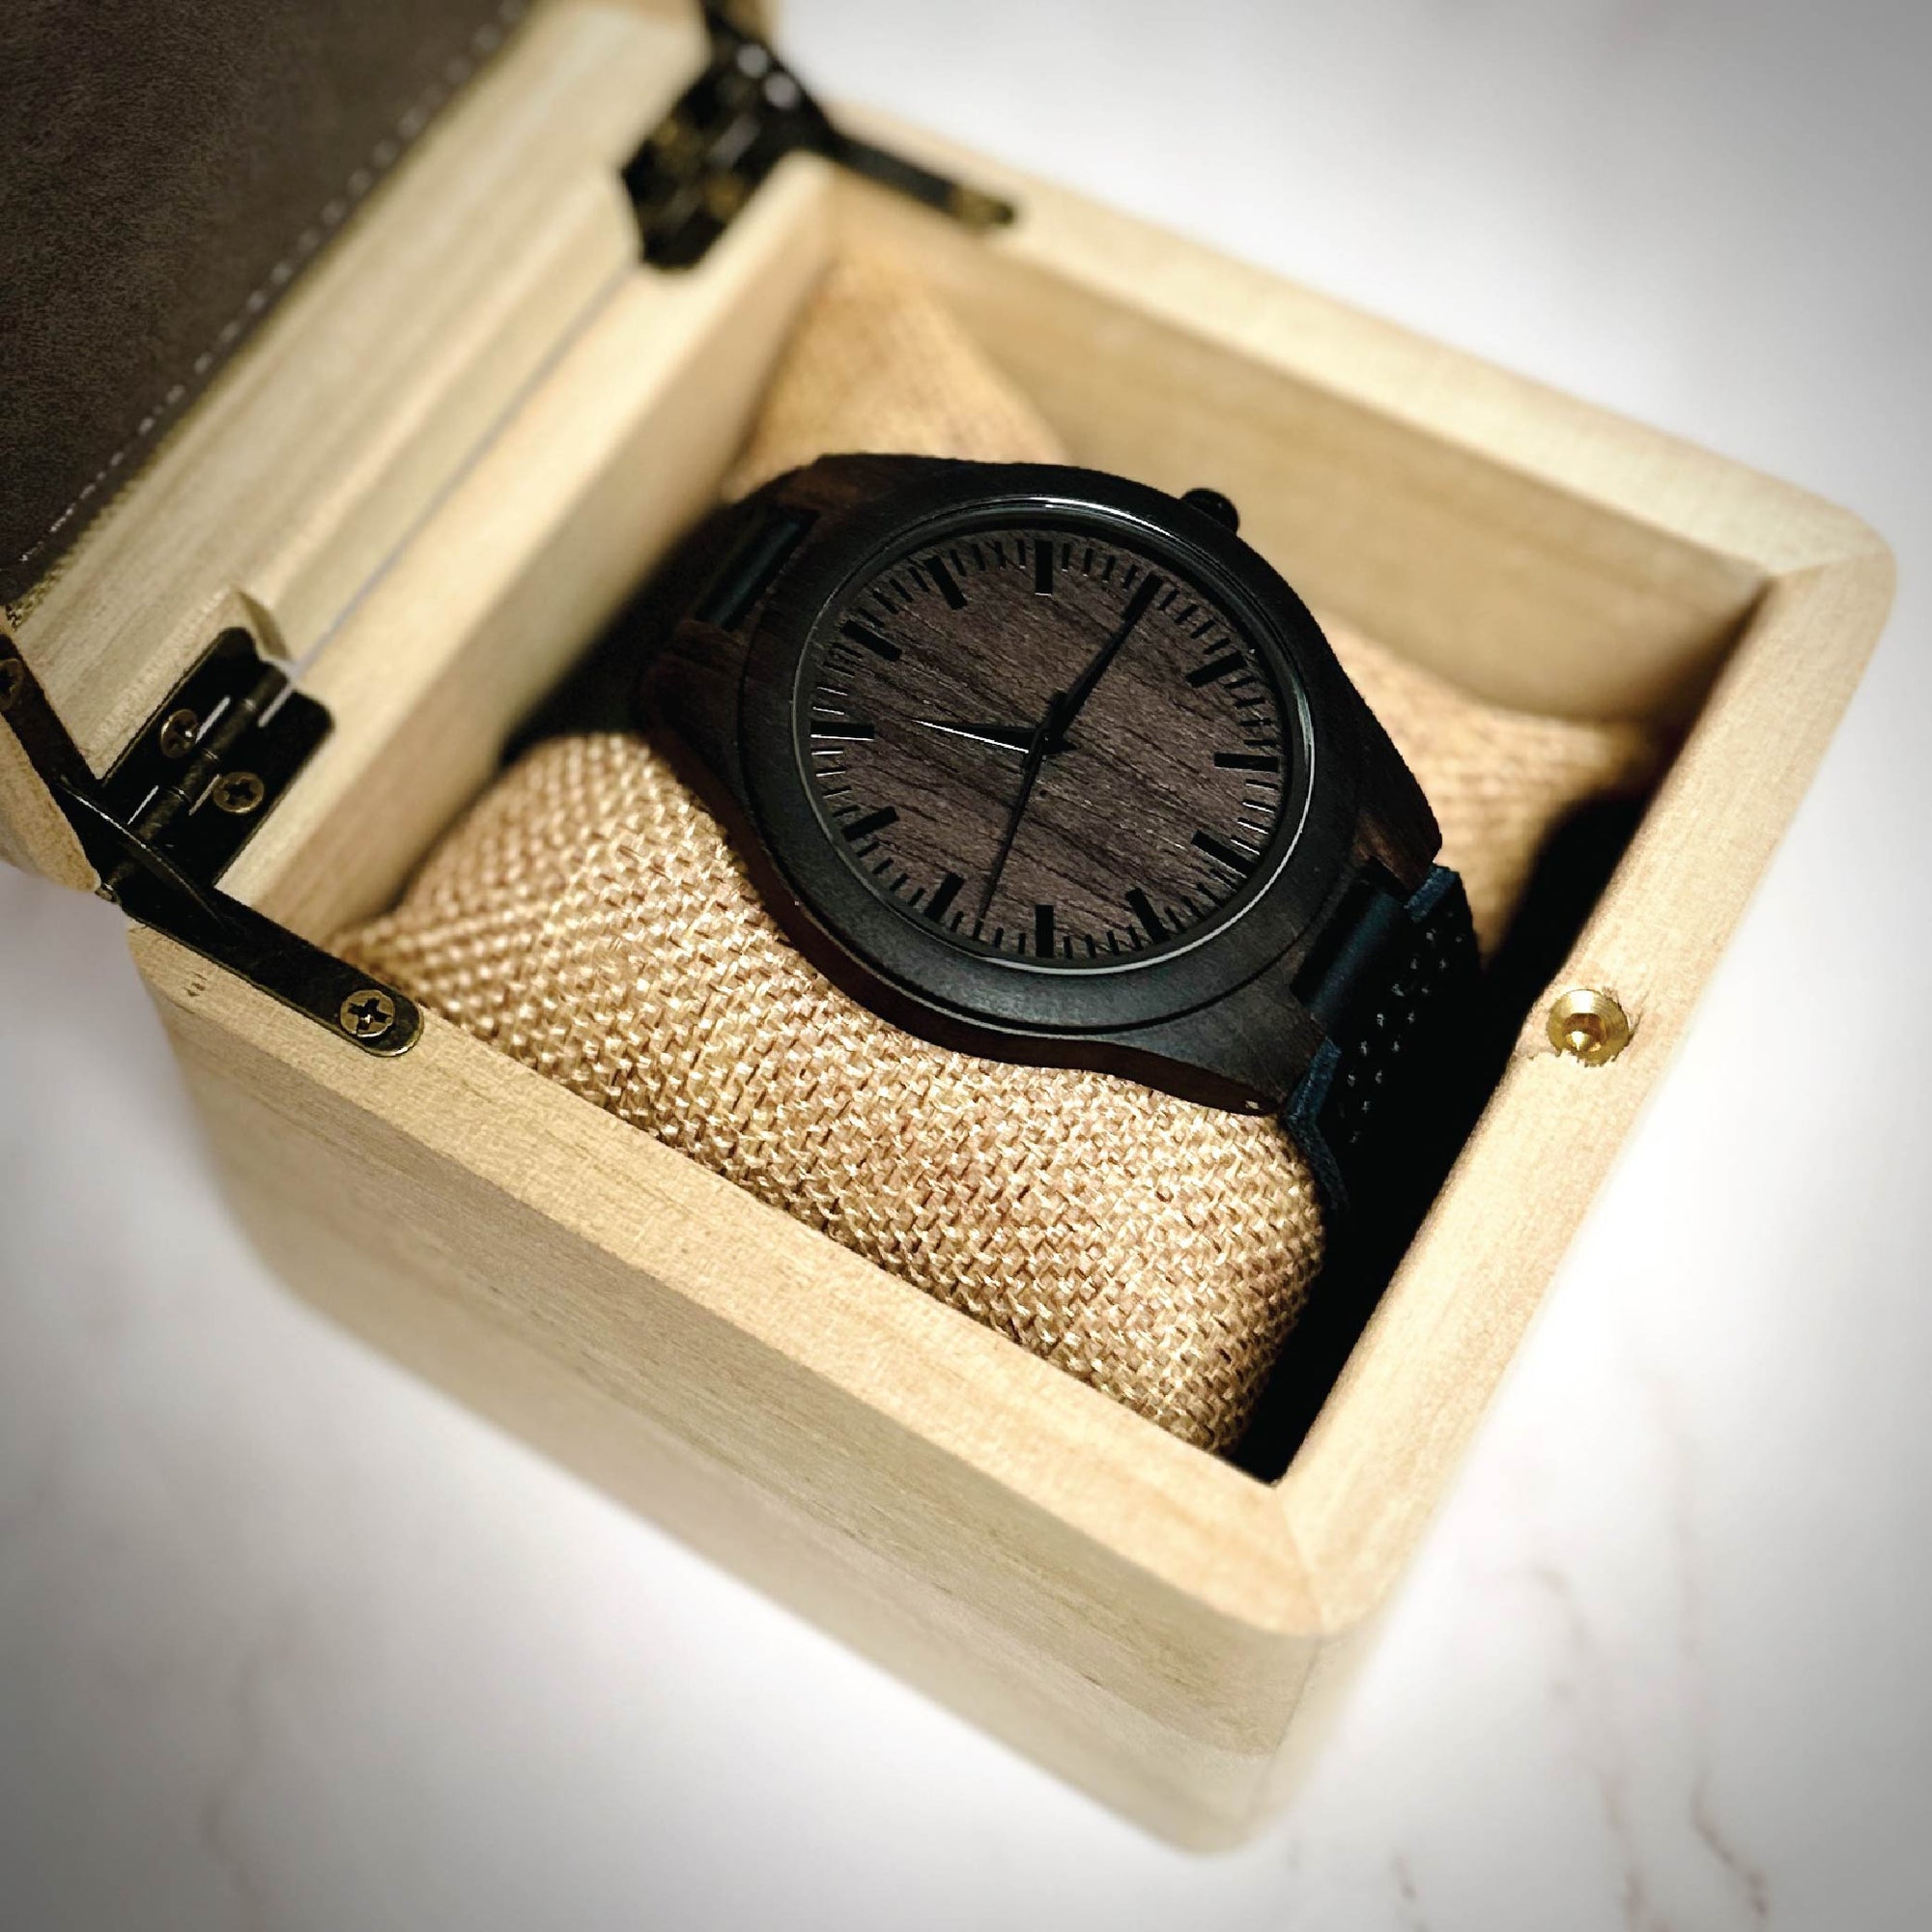 Sentimental Watch And Box